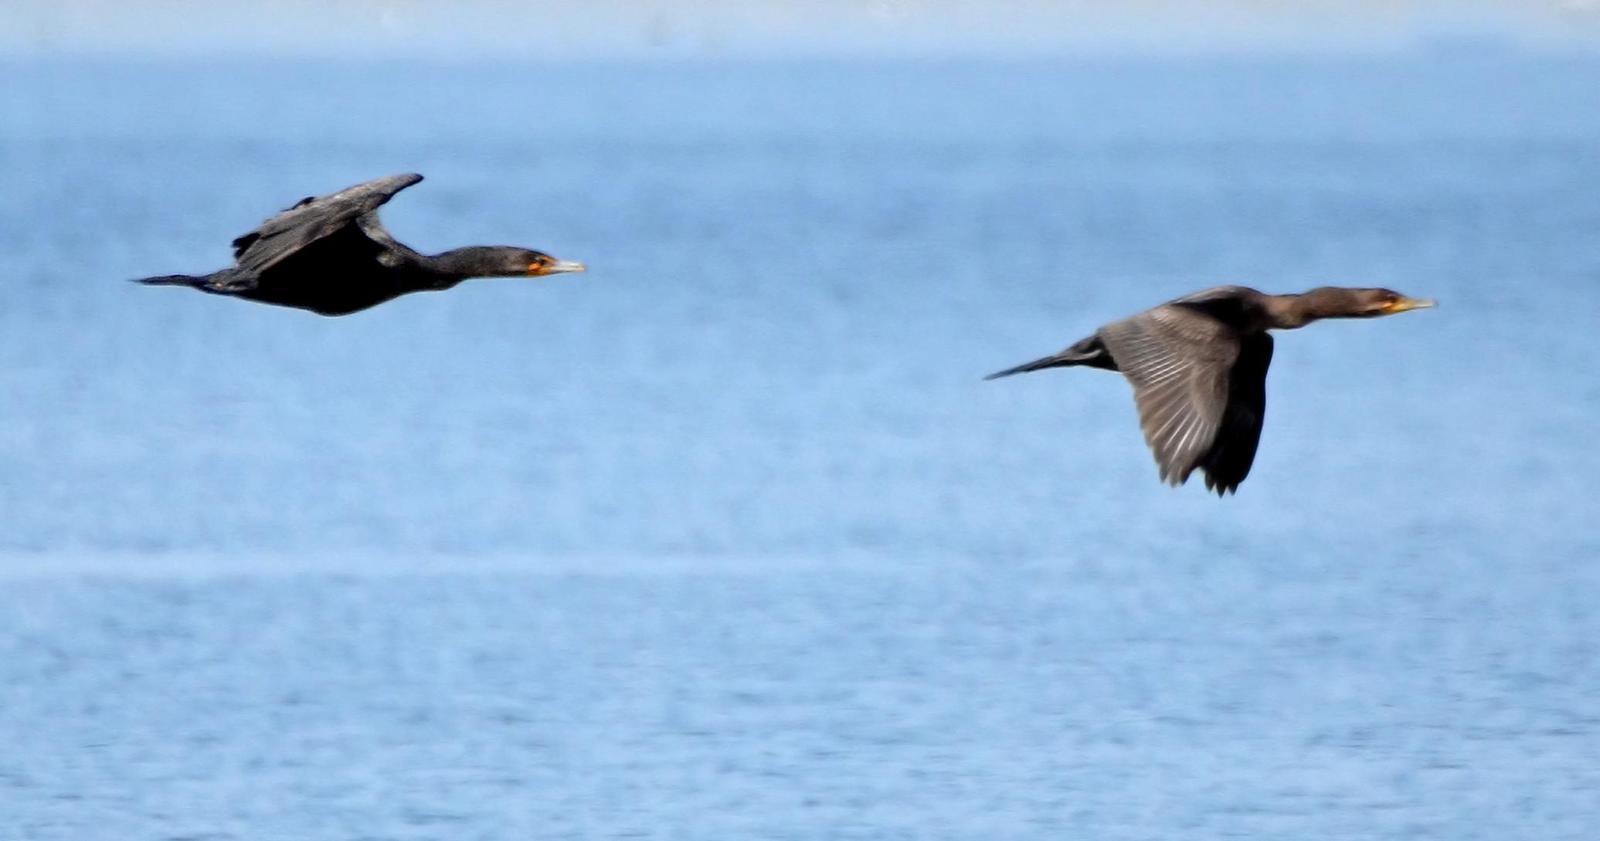 Double-crested Cormorant Photo by Steven Mlodinow